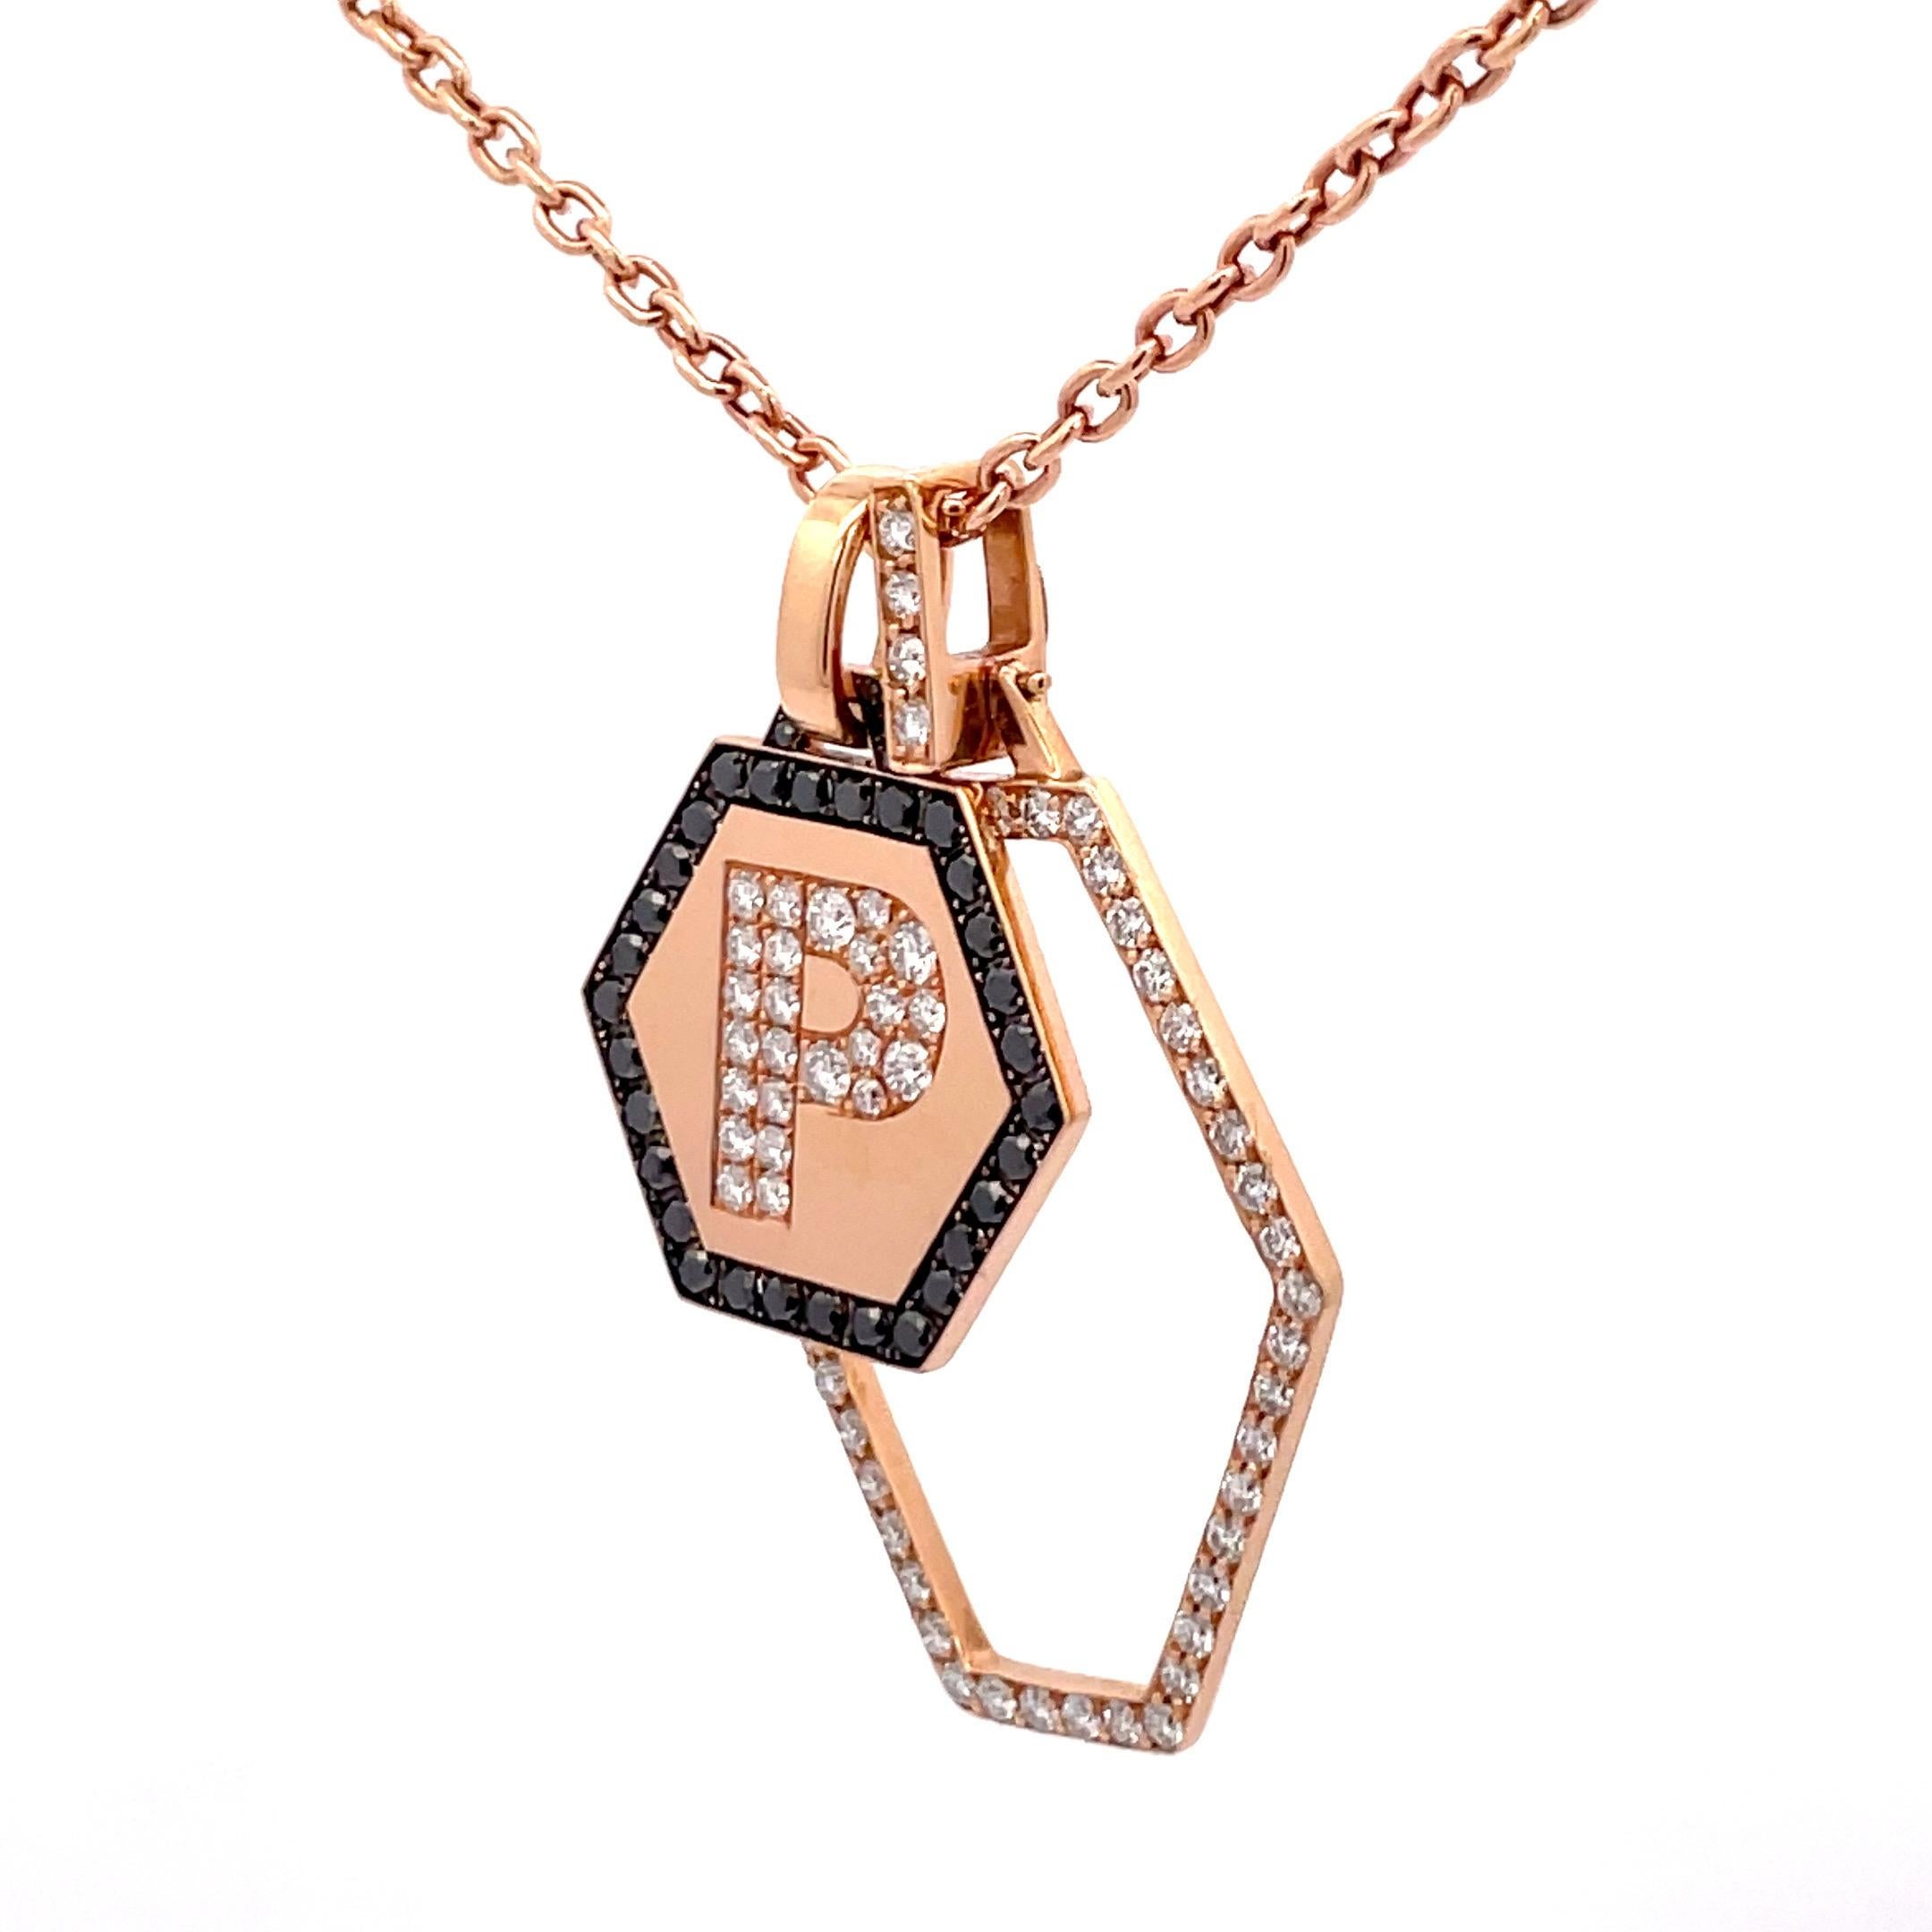 Italian, 18 Karat Rose Gold charm pendant necklace featuring 74 white diamonds weighing 1.02 Carats and 30 Black Diamonds weighing 0.68 Carats.
Can be made with any initial.
Black Diamond pendant can be made with White Diamonds, Blue or Pink